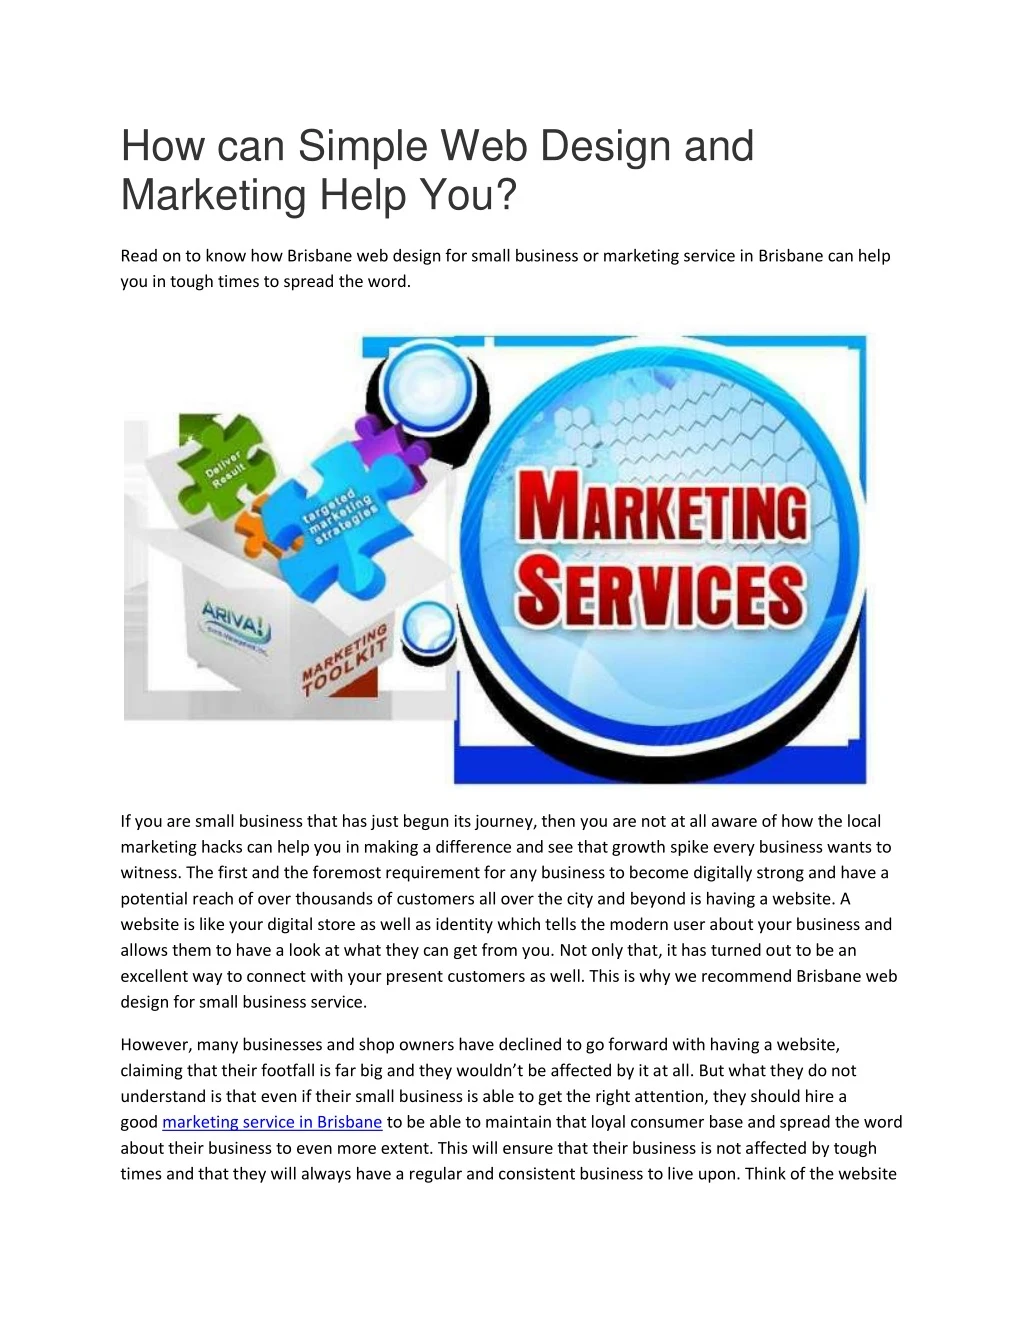 how can simple web design and marketing help you